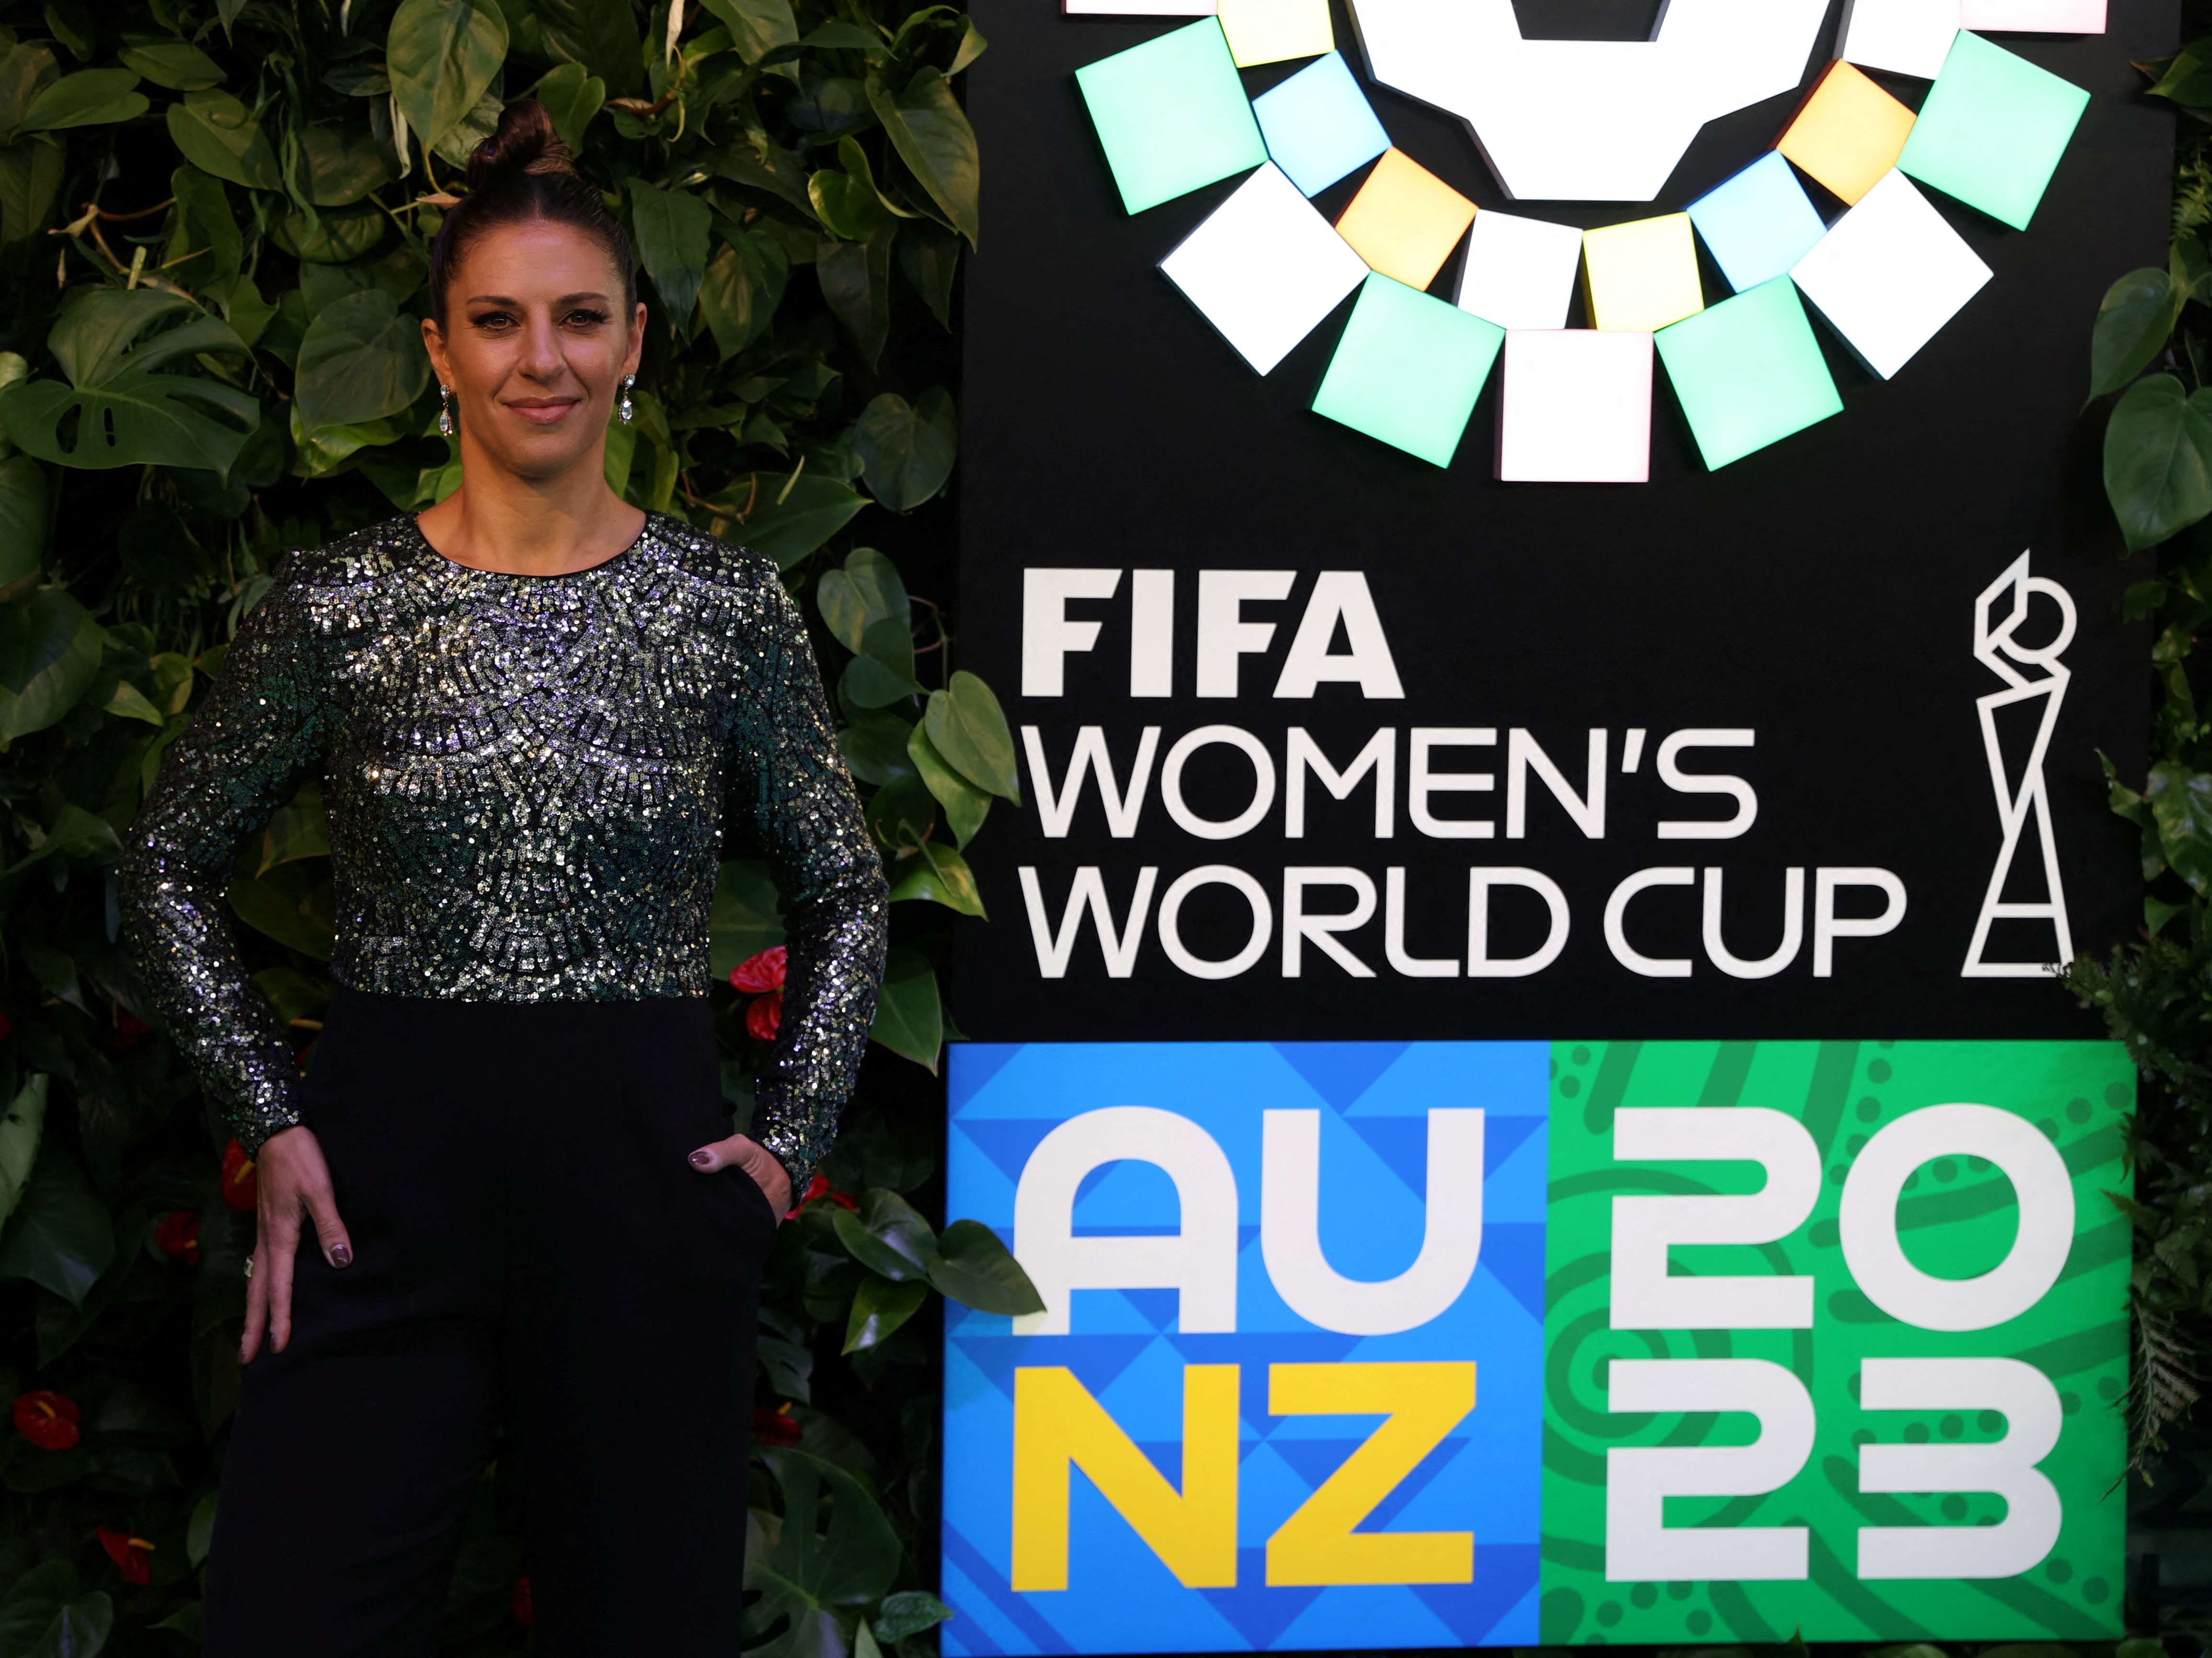 FIFA to offer 20,000 free tickets for Womens World Cup in NZ Reuters